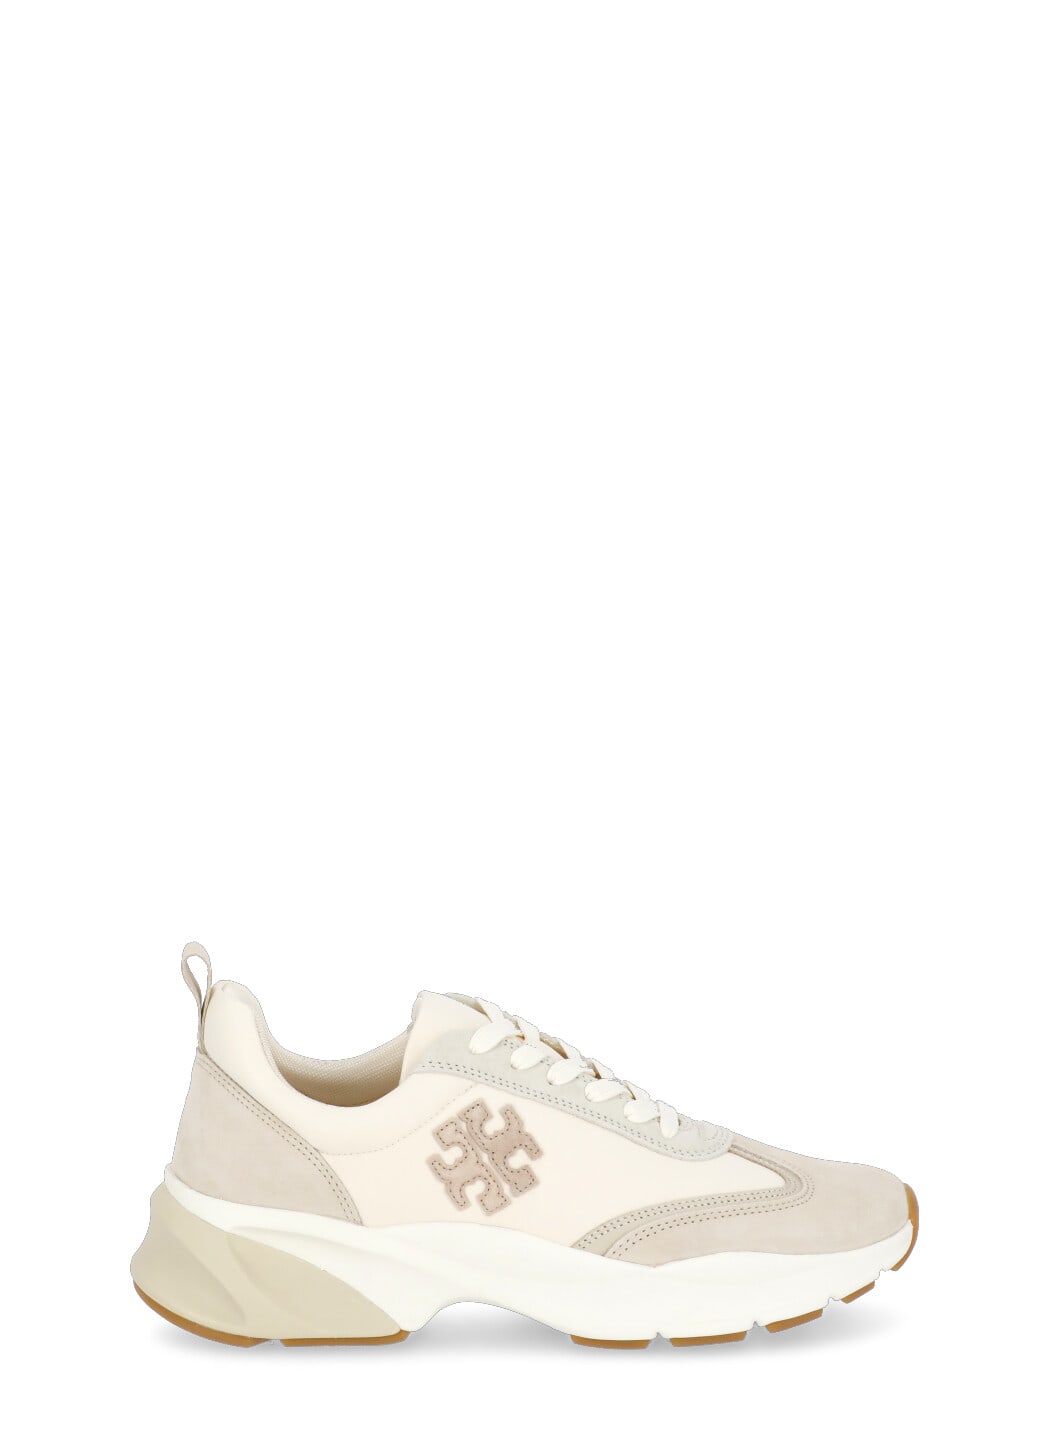 TORY BURCH GOOD LUCK SNEAKERS